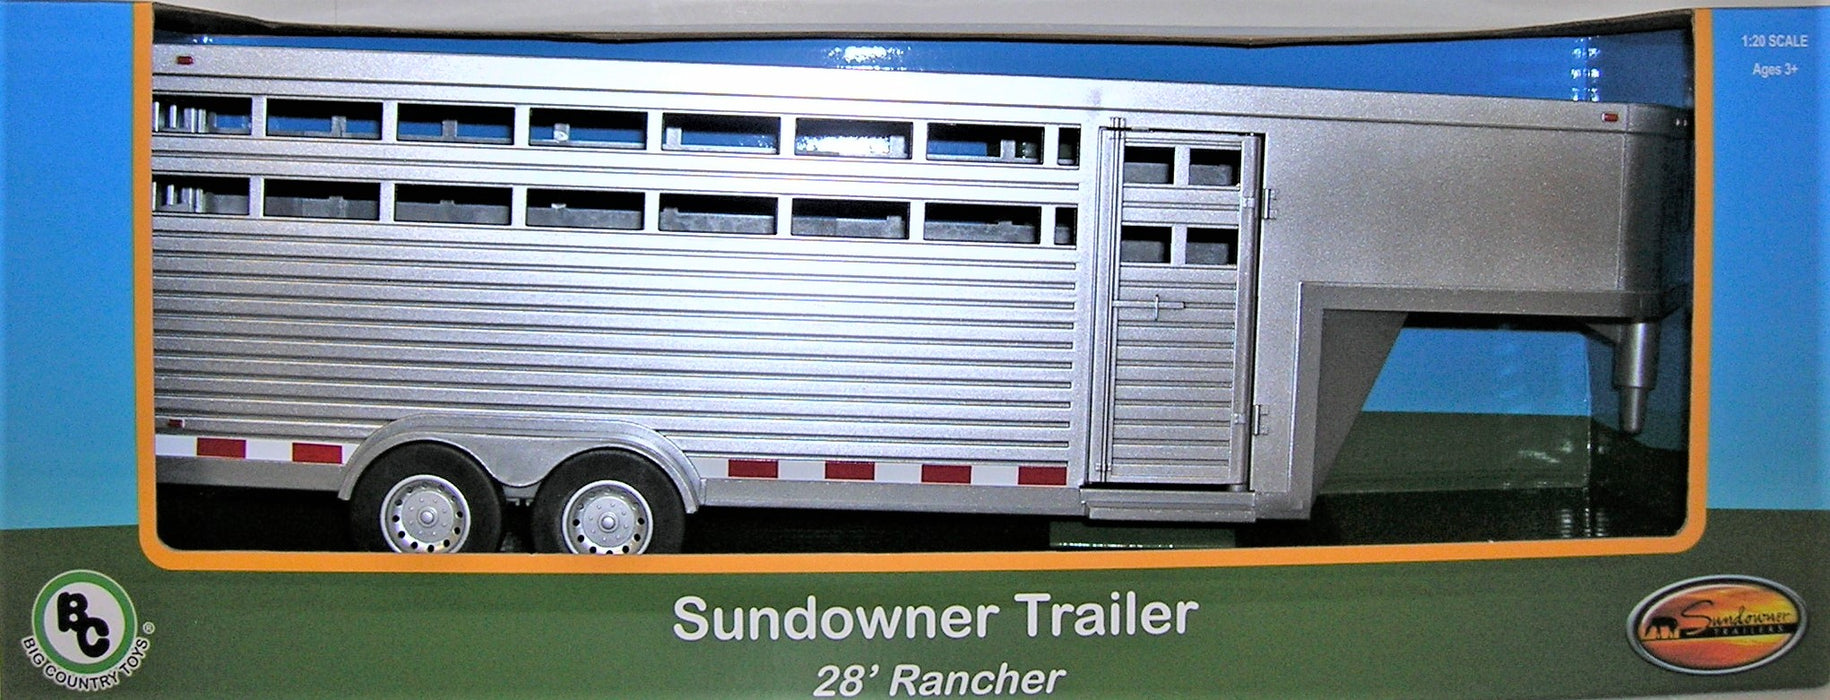 1/20 BIG COUNTRY TOY SUNDOWNER TRAILER 28FT RANCHER